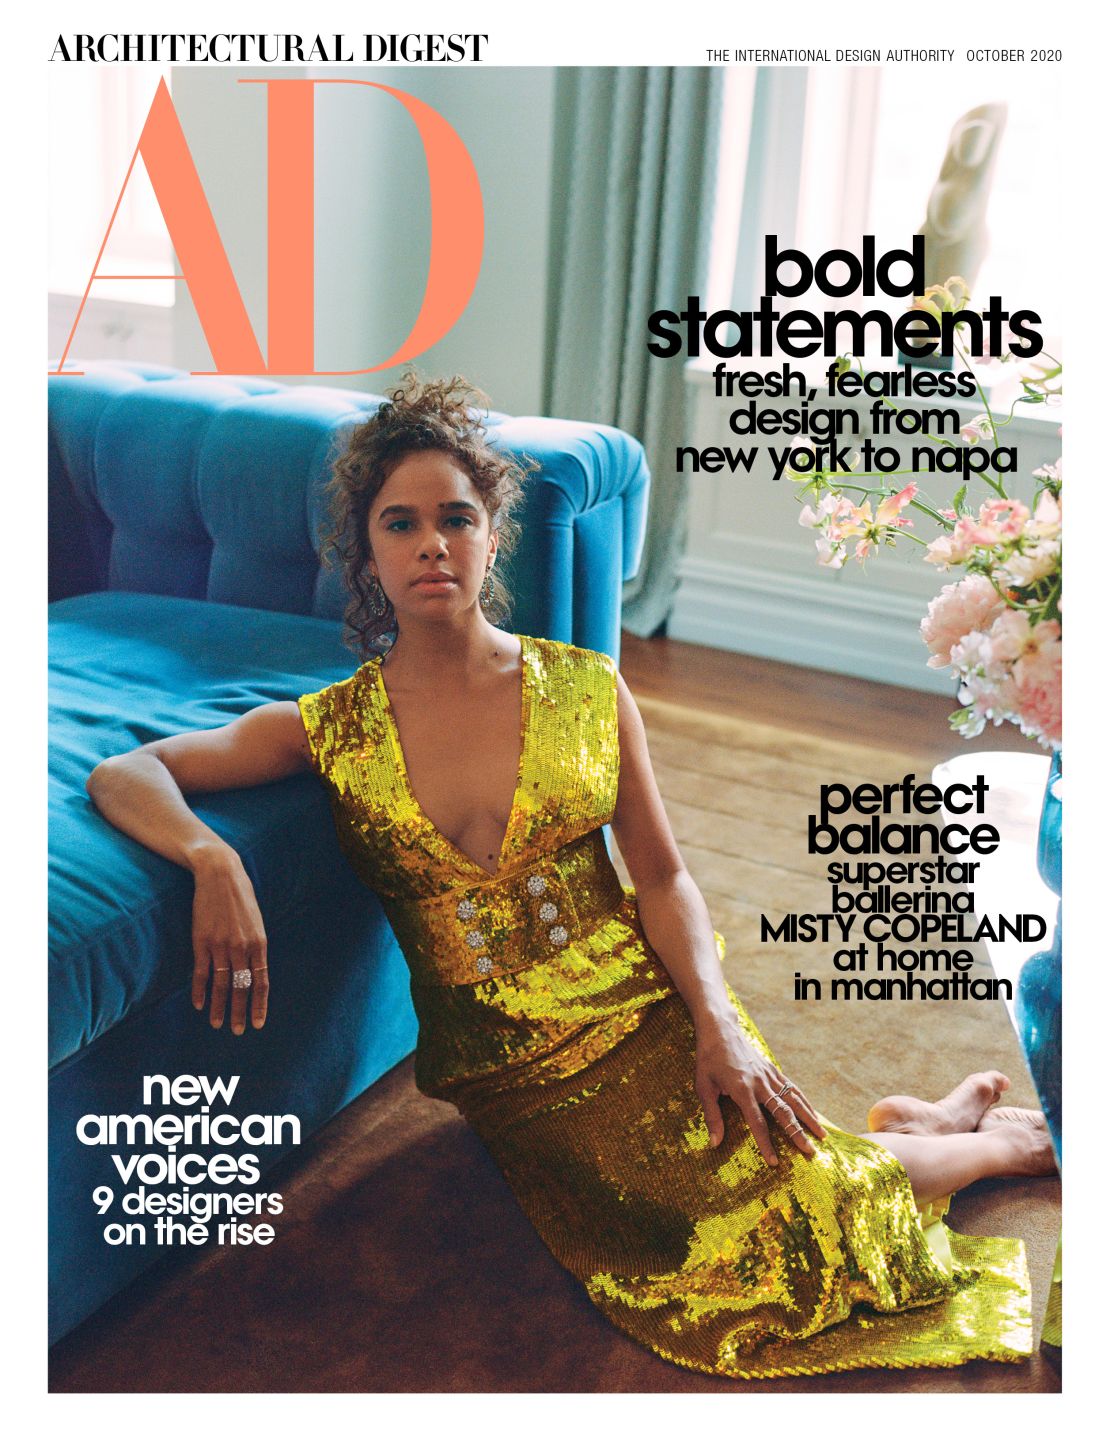 Architectural Digest's October cover.